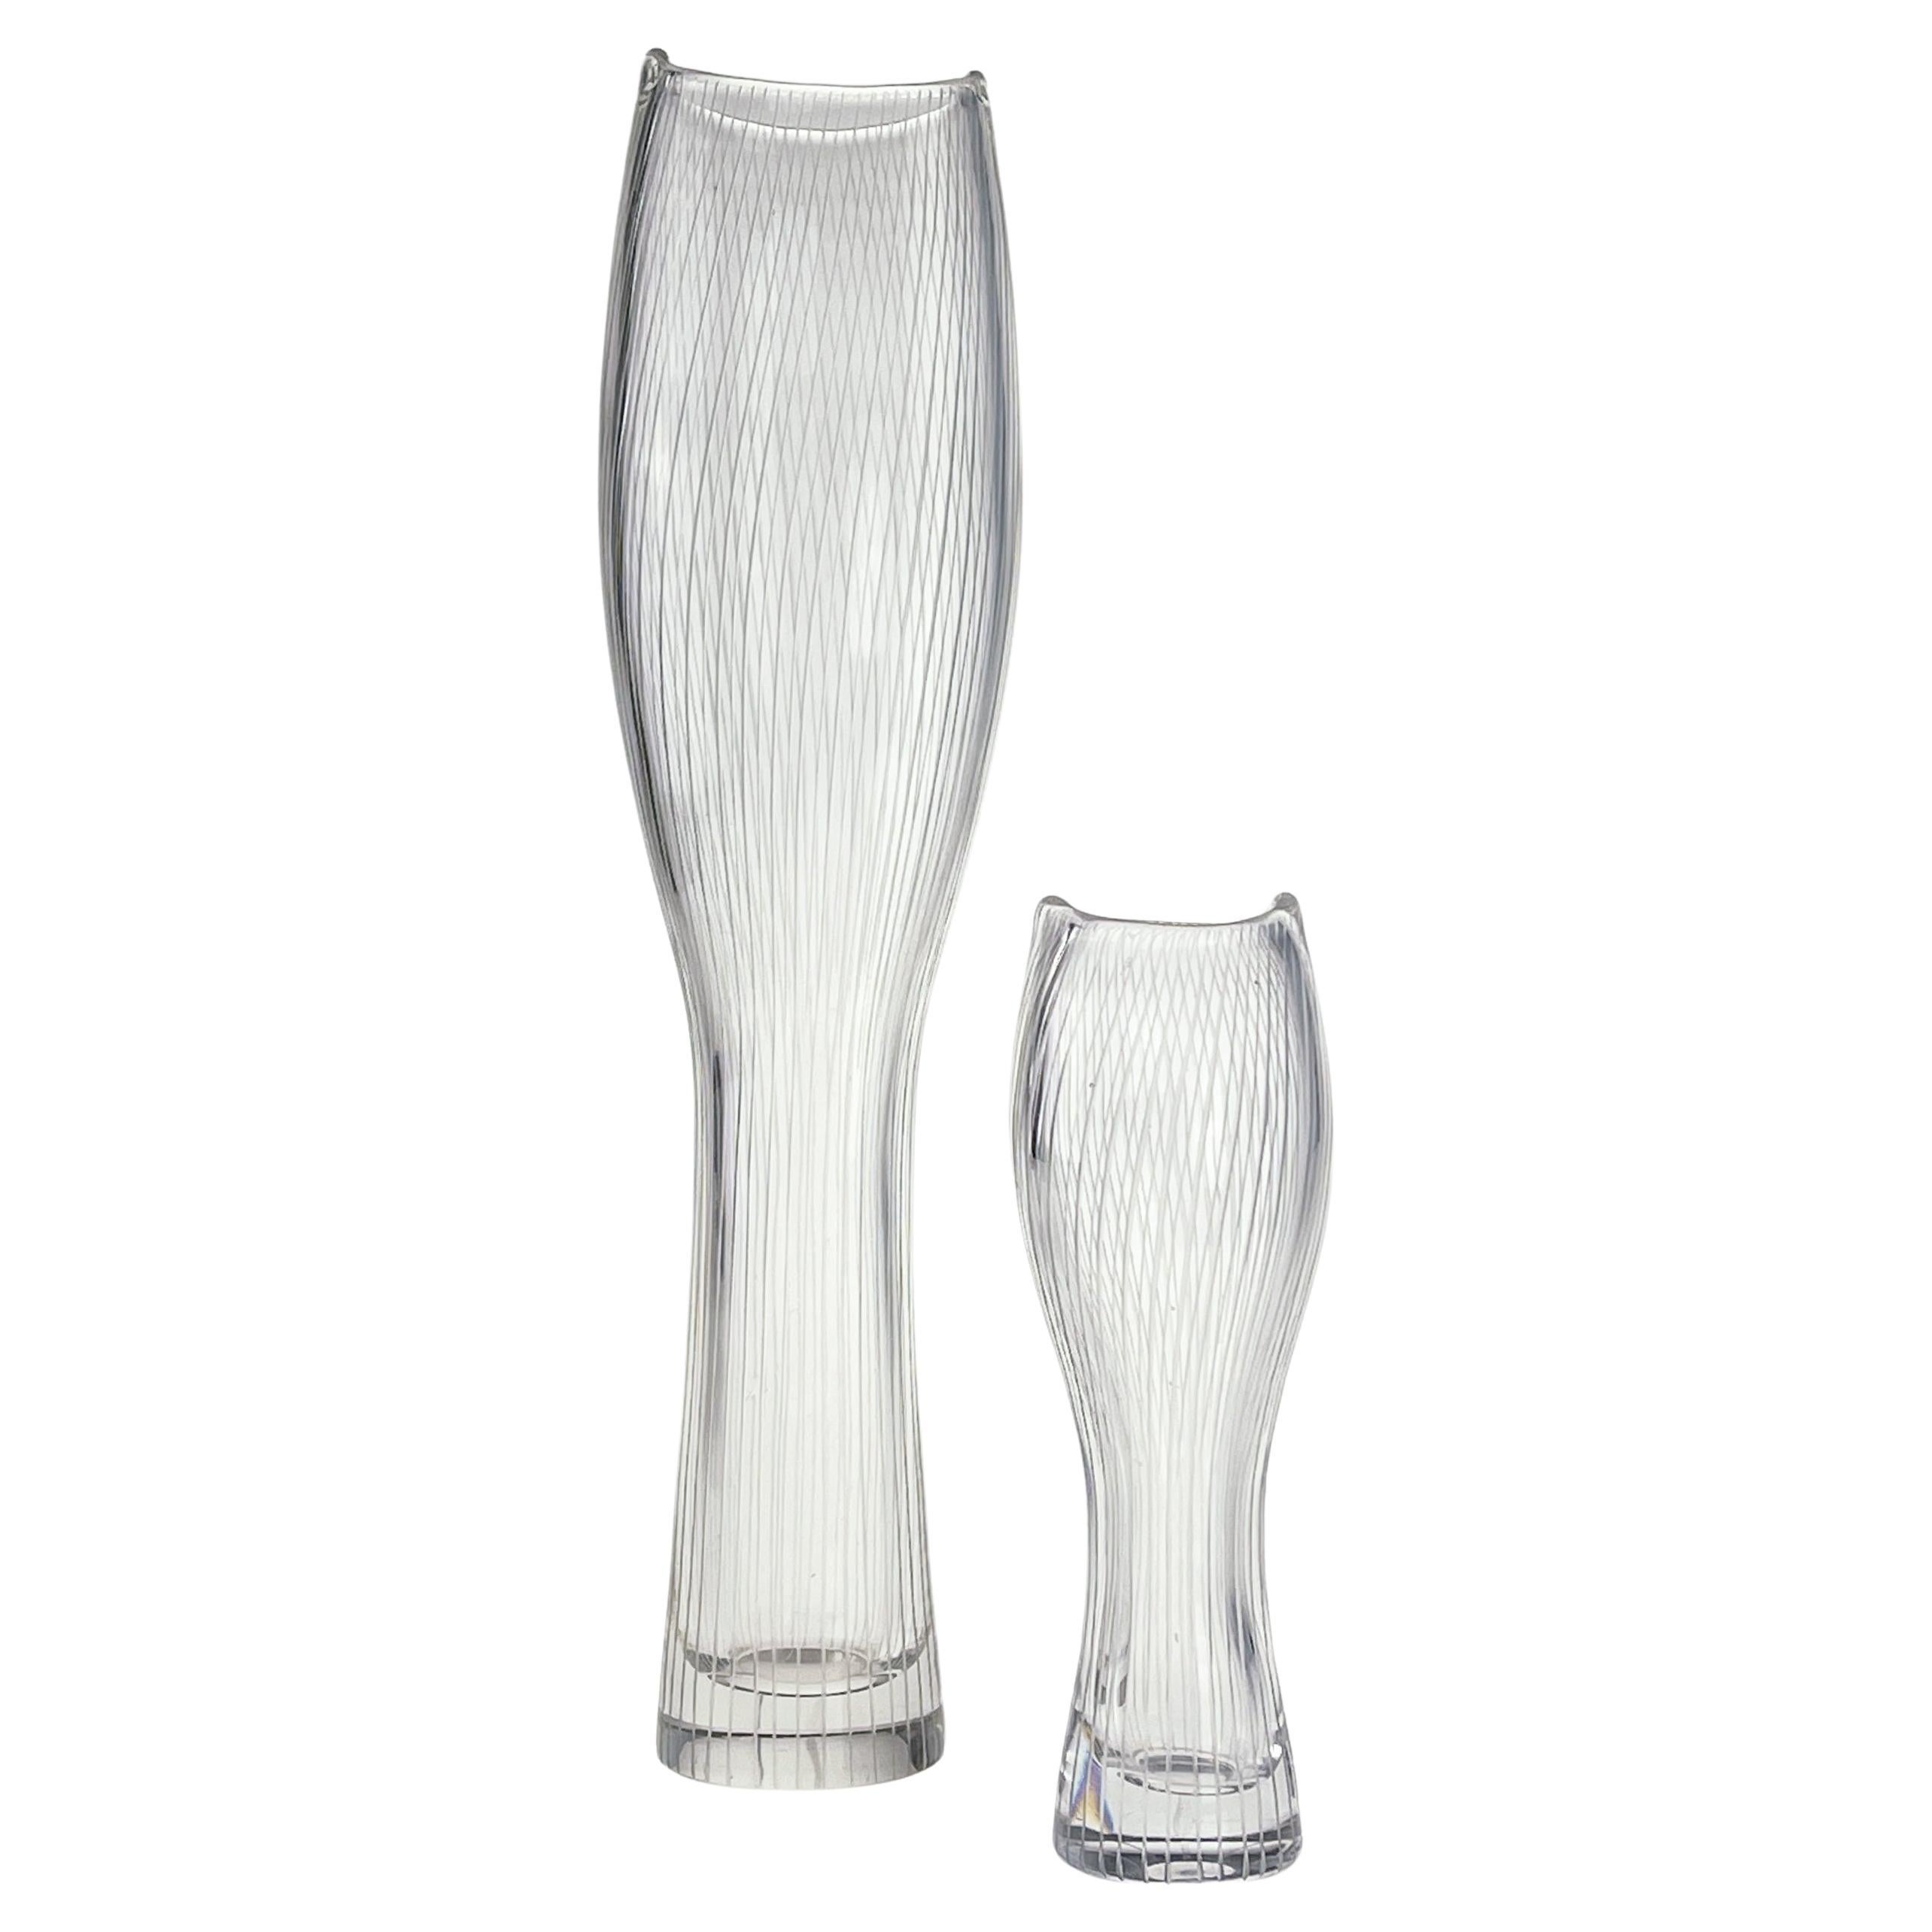 Tapio Wirkkala - A set of both sizes crystal art-object, model 3545 - Iittala Finland 1957 & 1958.

Two turned mold-blown crystal art-objects with spiraled cut lines. These art-objects are model 3545 in the oeuvre of Tapio Wirkkala. It was